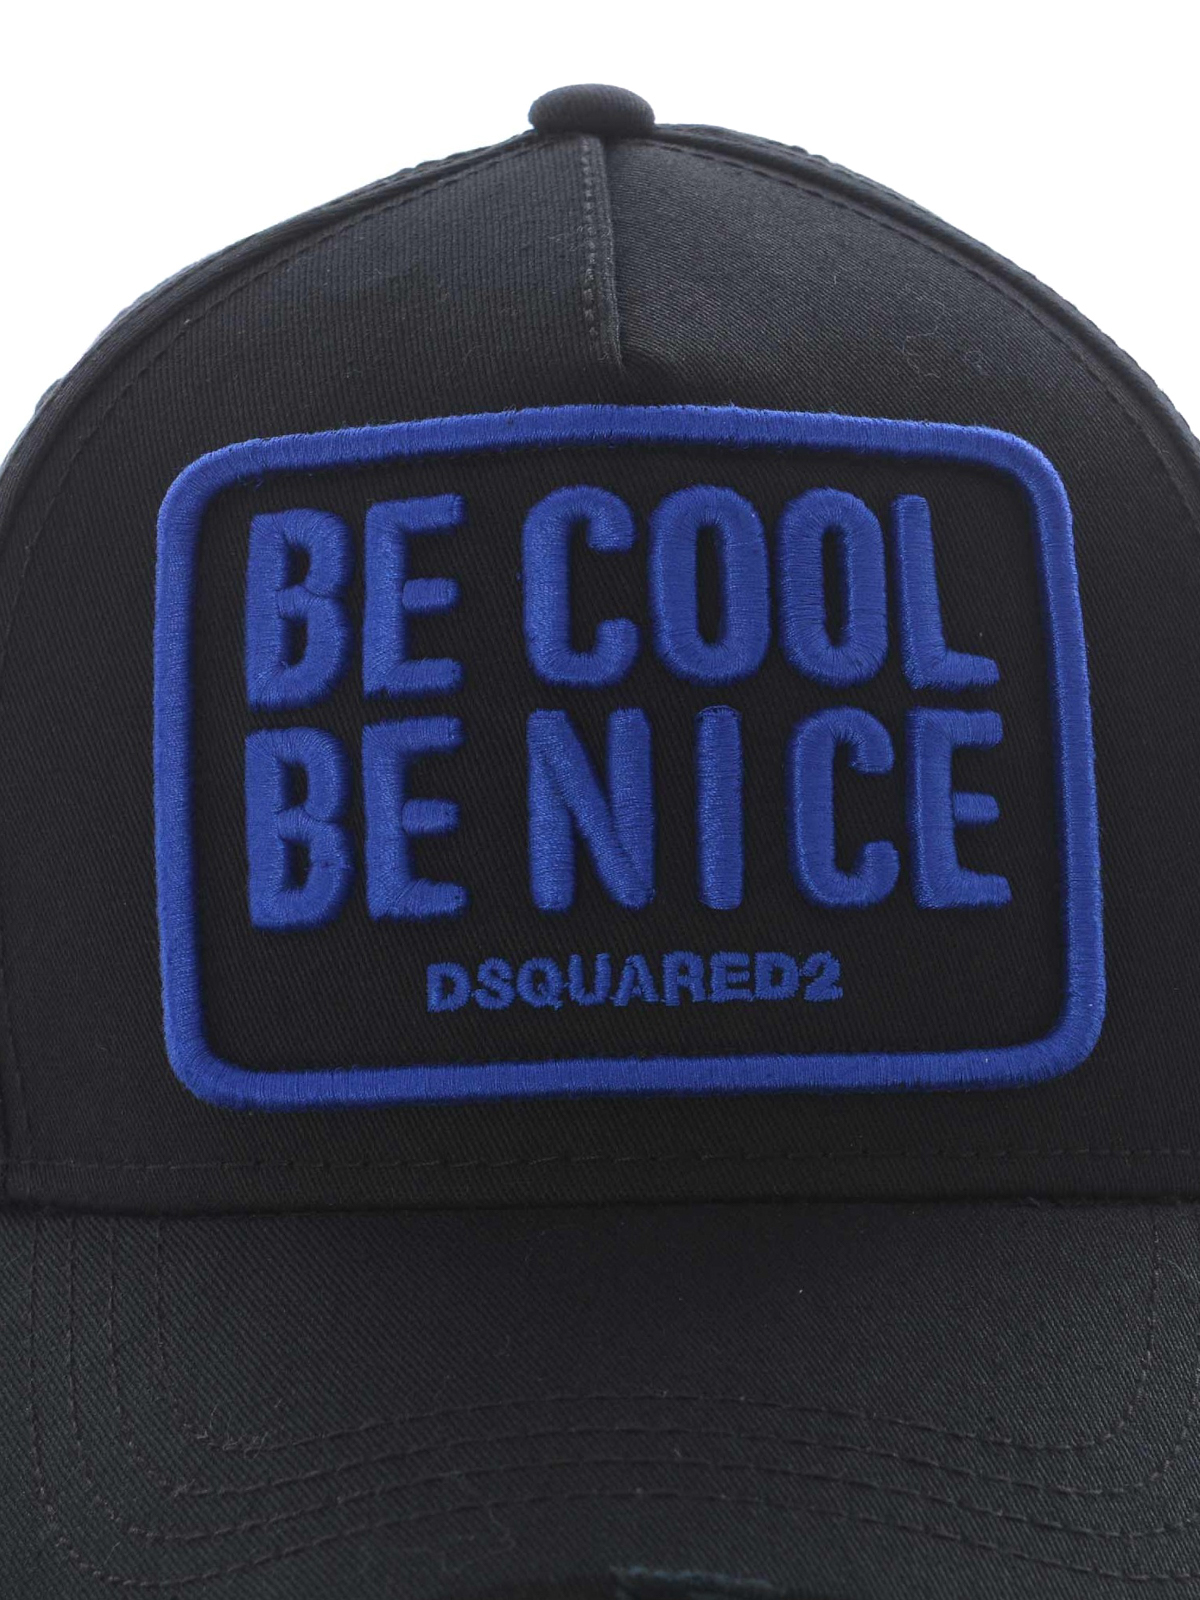 dsquared2 cap be cool be nice